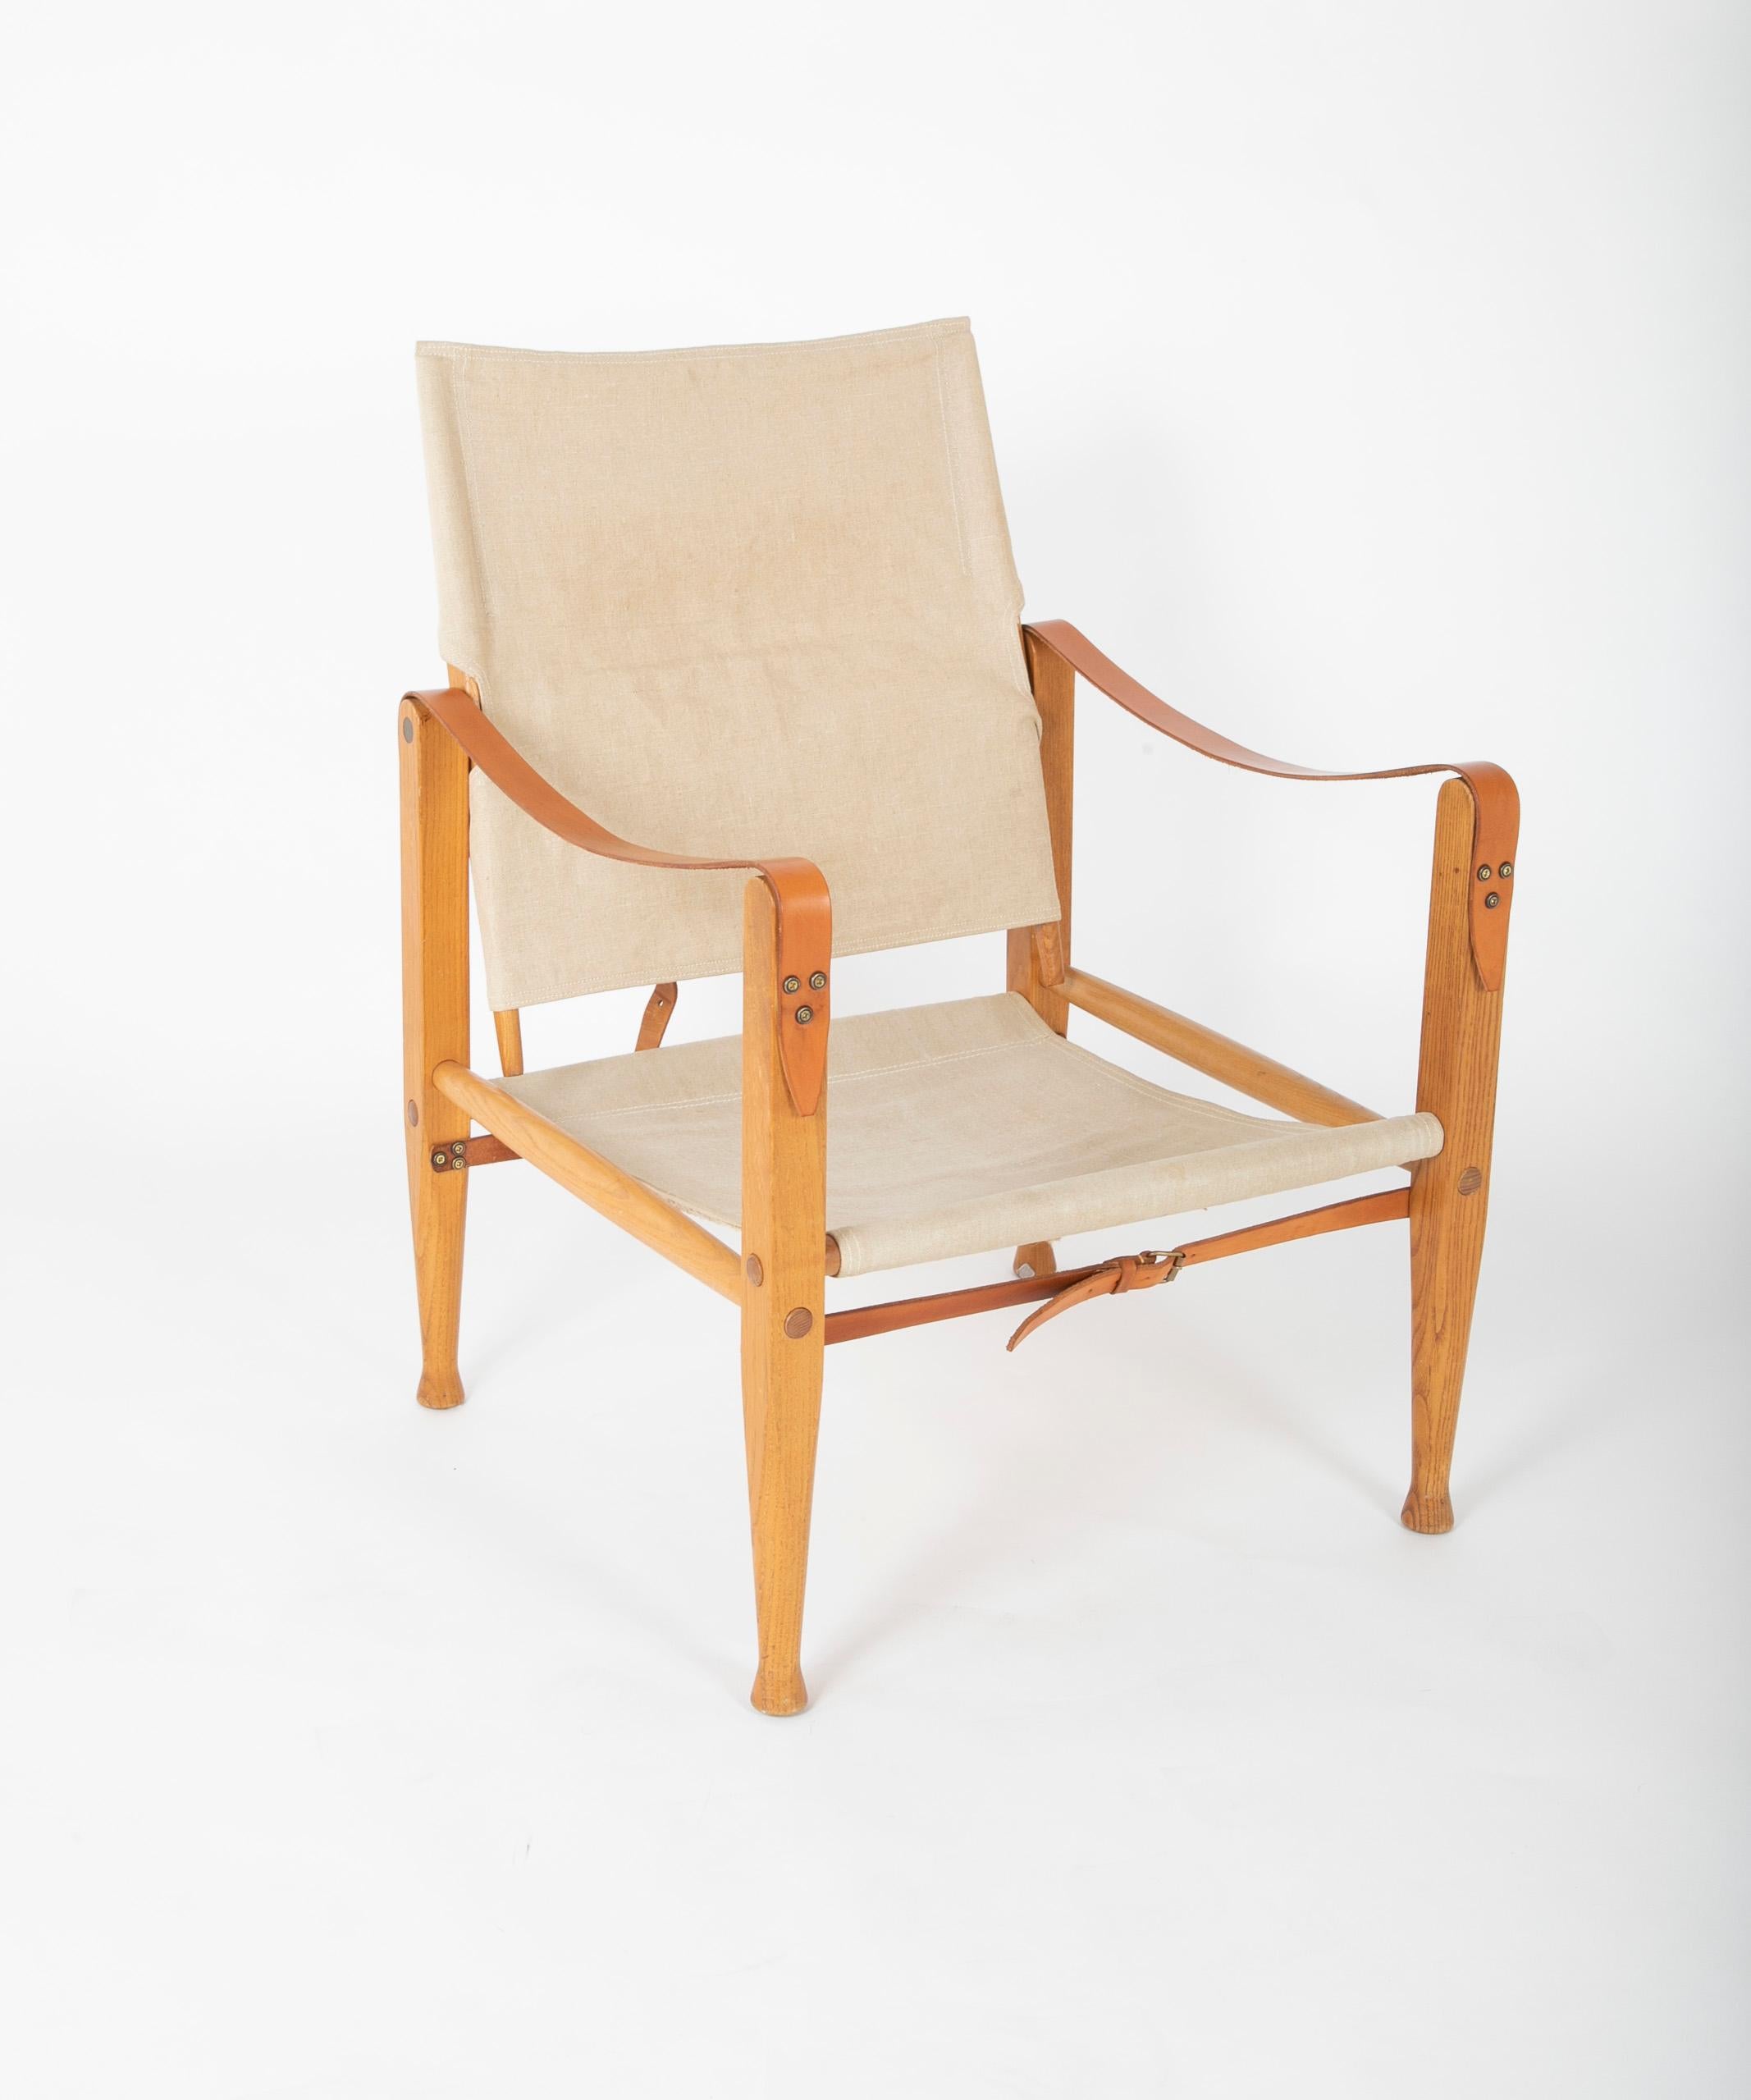 Kaare Klint Safari chair - Rasmussen Edition of canvas and leather. With later canvas.